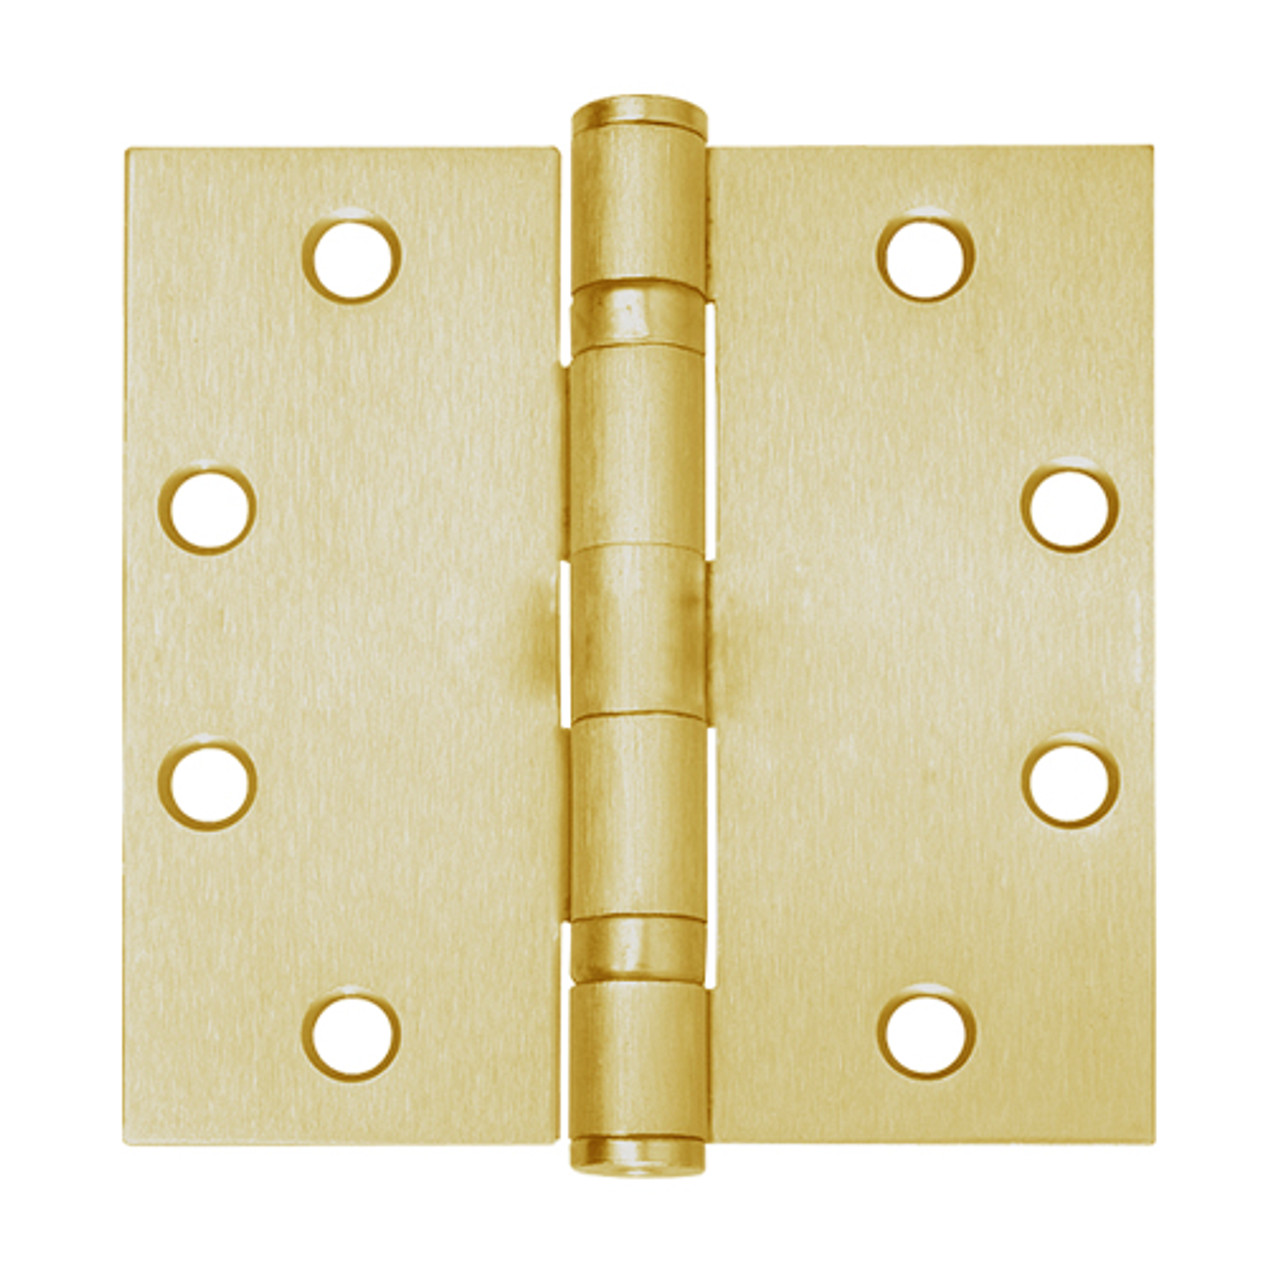 5BB1-4-5x4-5-606-TW8 IVES 5 Knuckle Ball Bearing Full Mortise Hinge with Electric Thru-Wire in Satin Brass